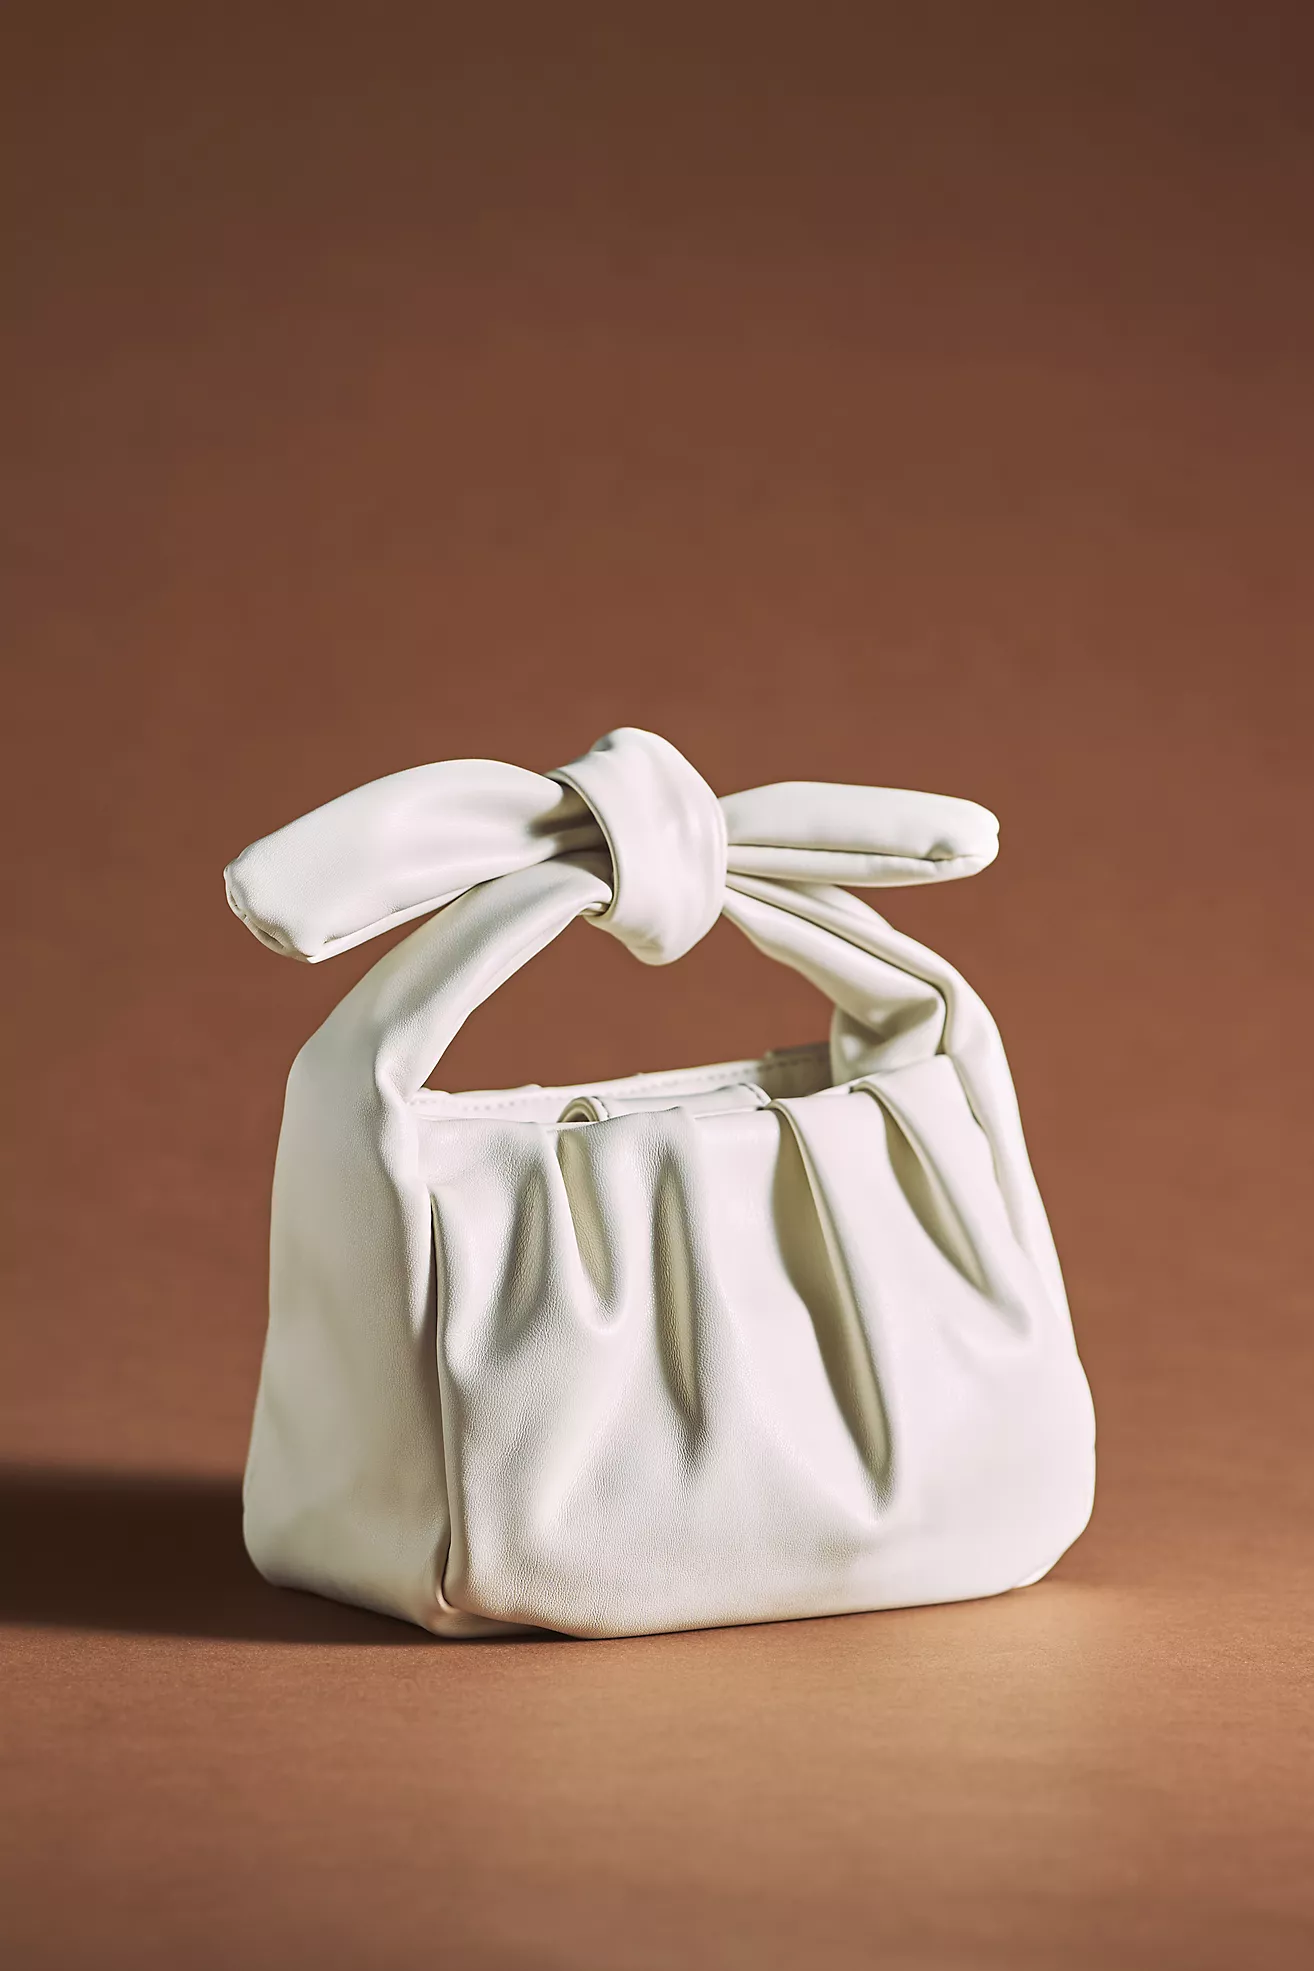 Mini Knot Bag by Anthropoogie